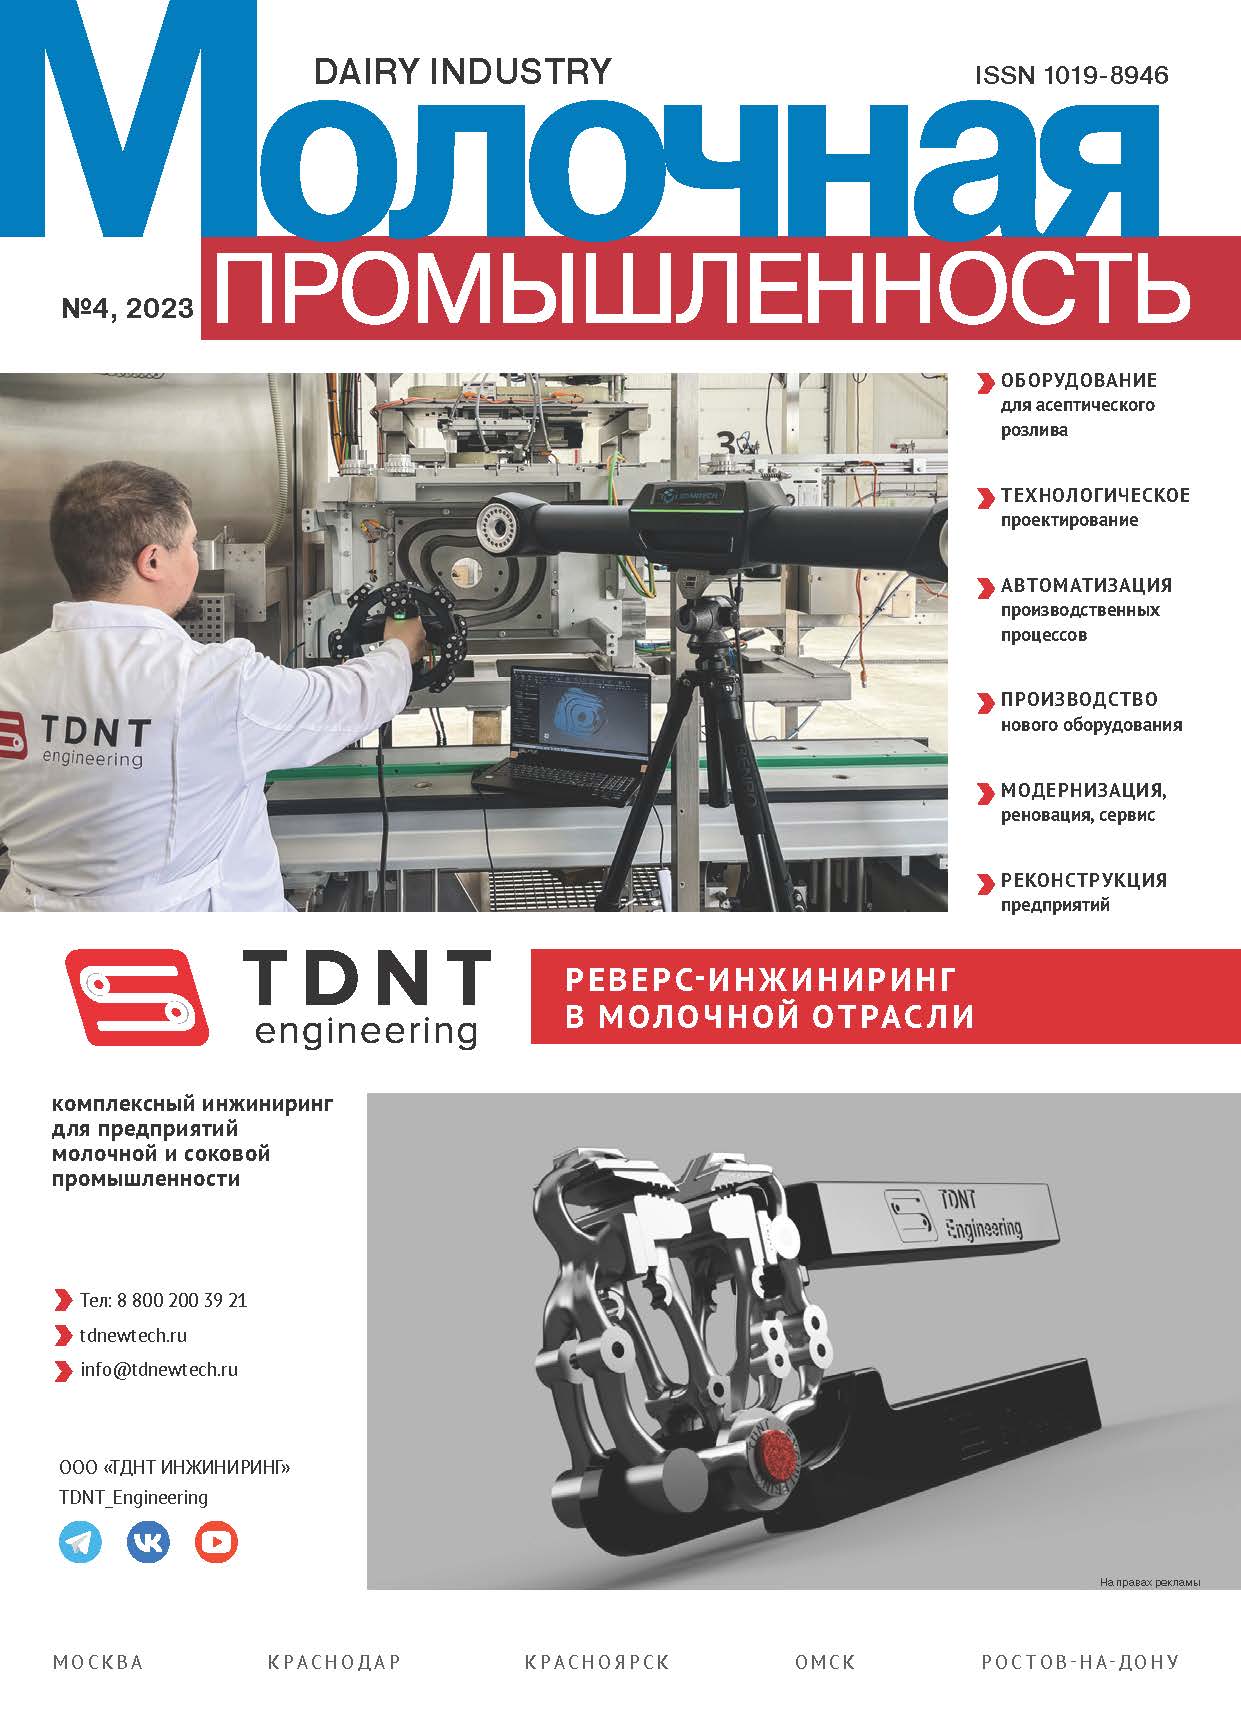                         TDNT Industrial: innovative technologies for reliable solutions
            